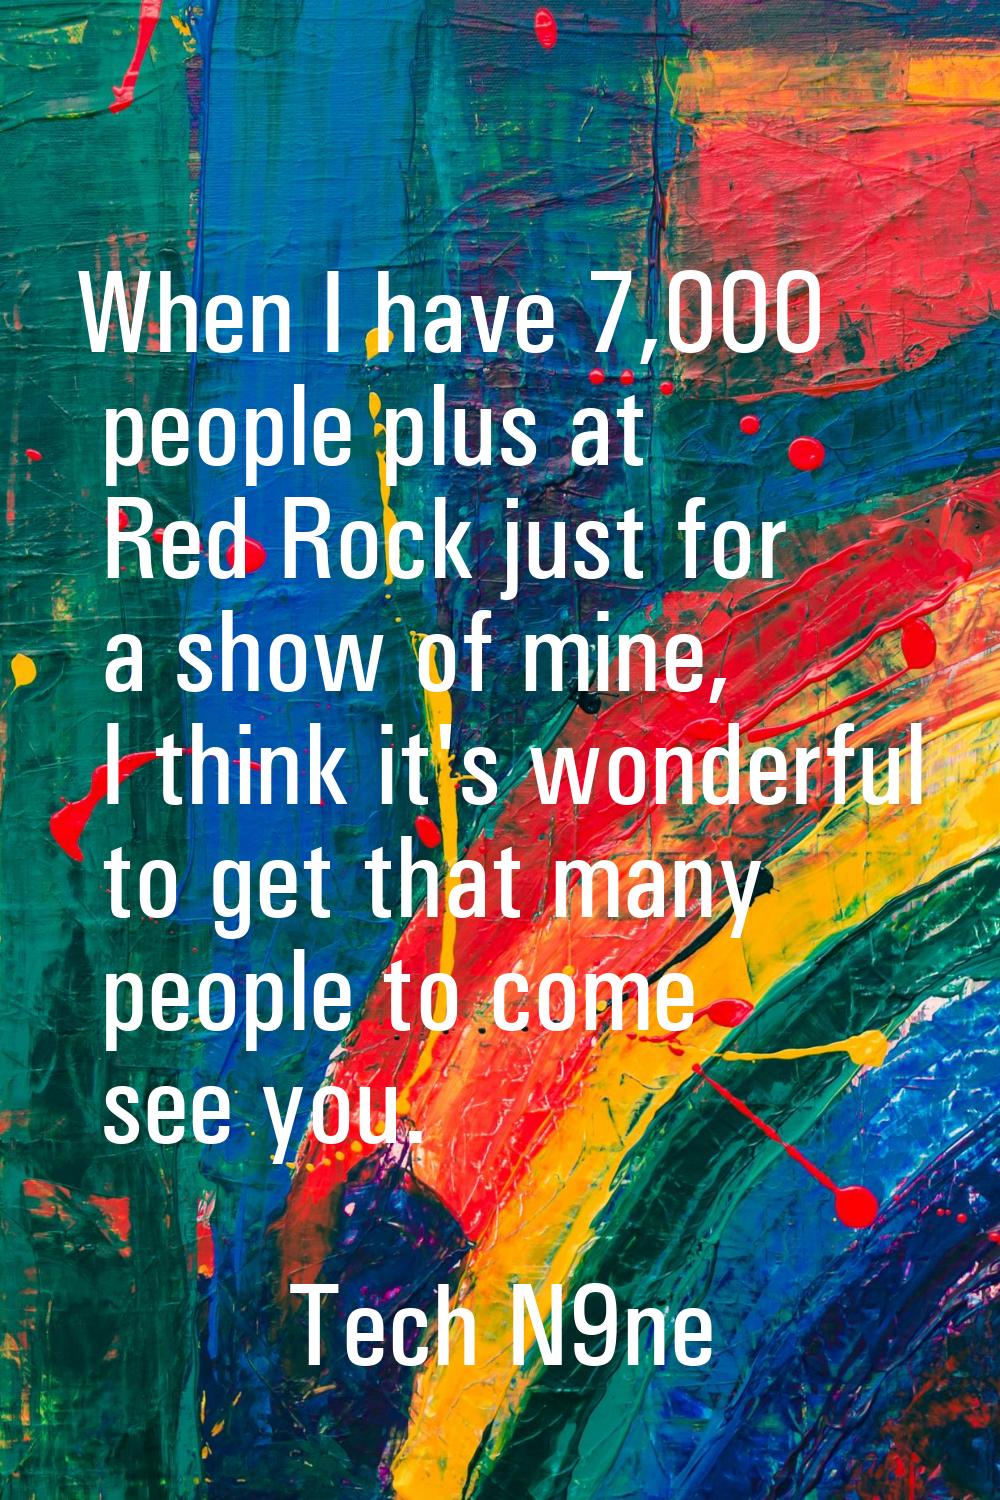 When I have 7,000 people plus at Red Rock just for a show of mine, I think it's wonderful to get th